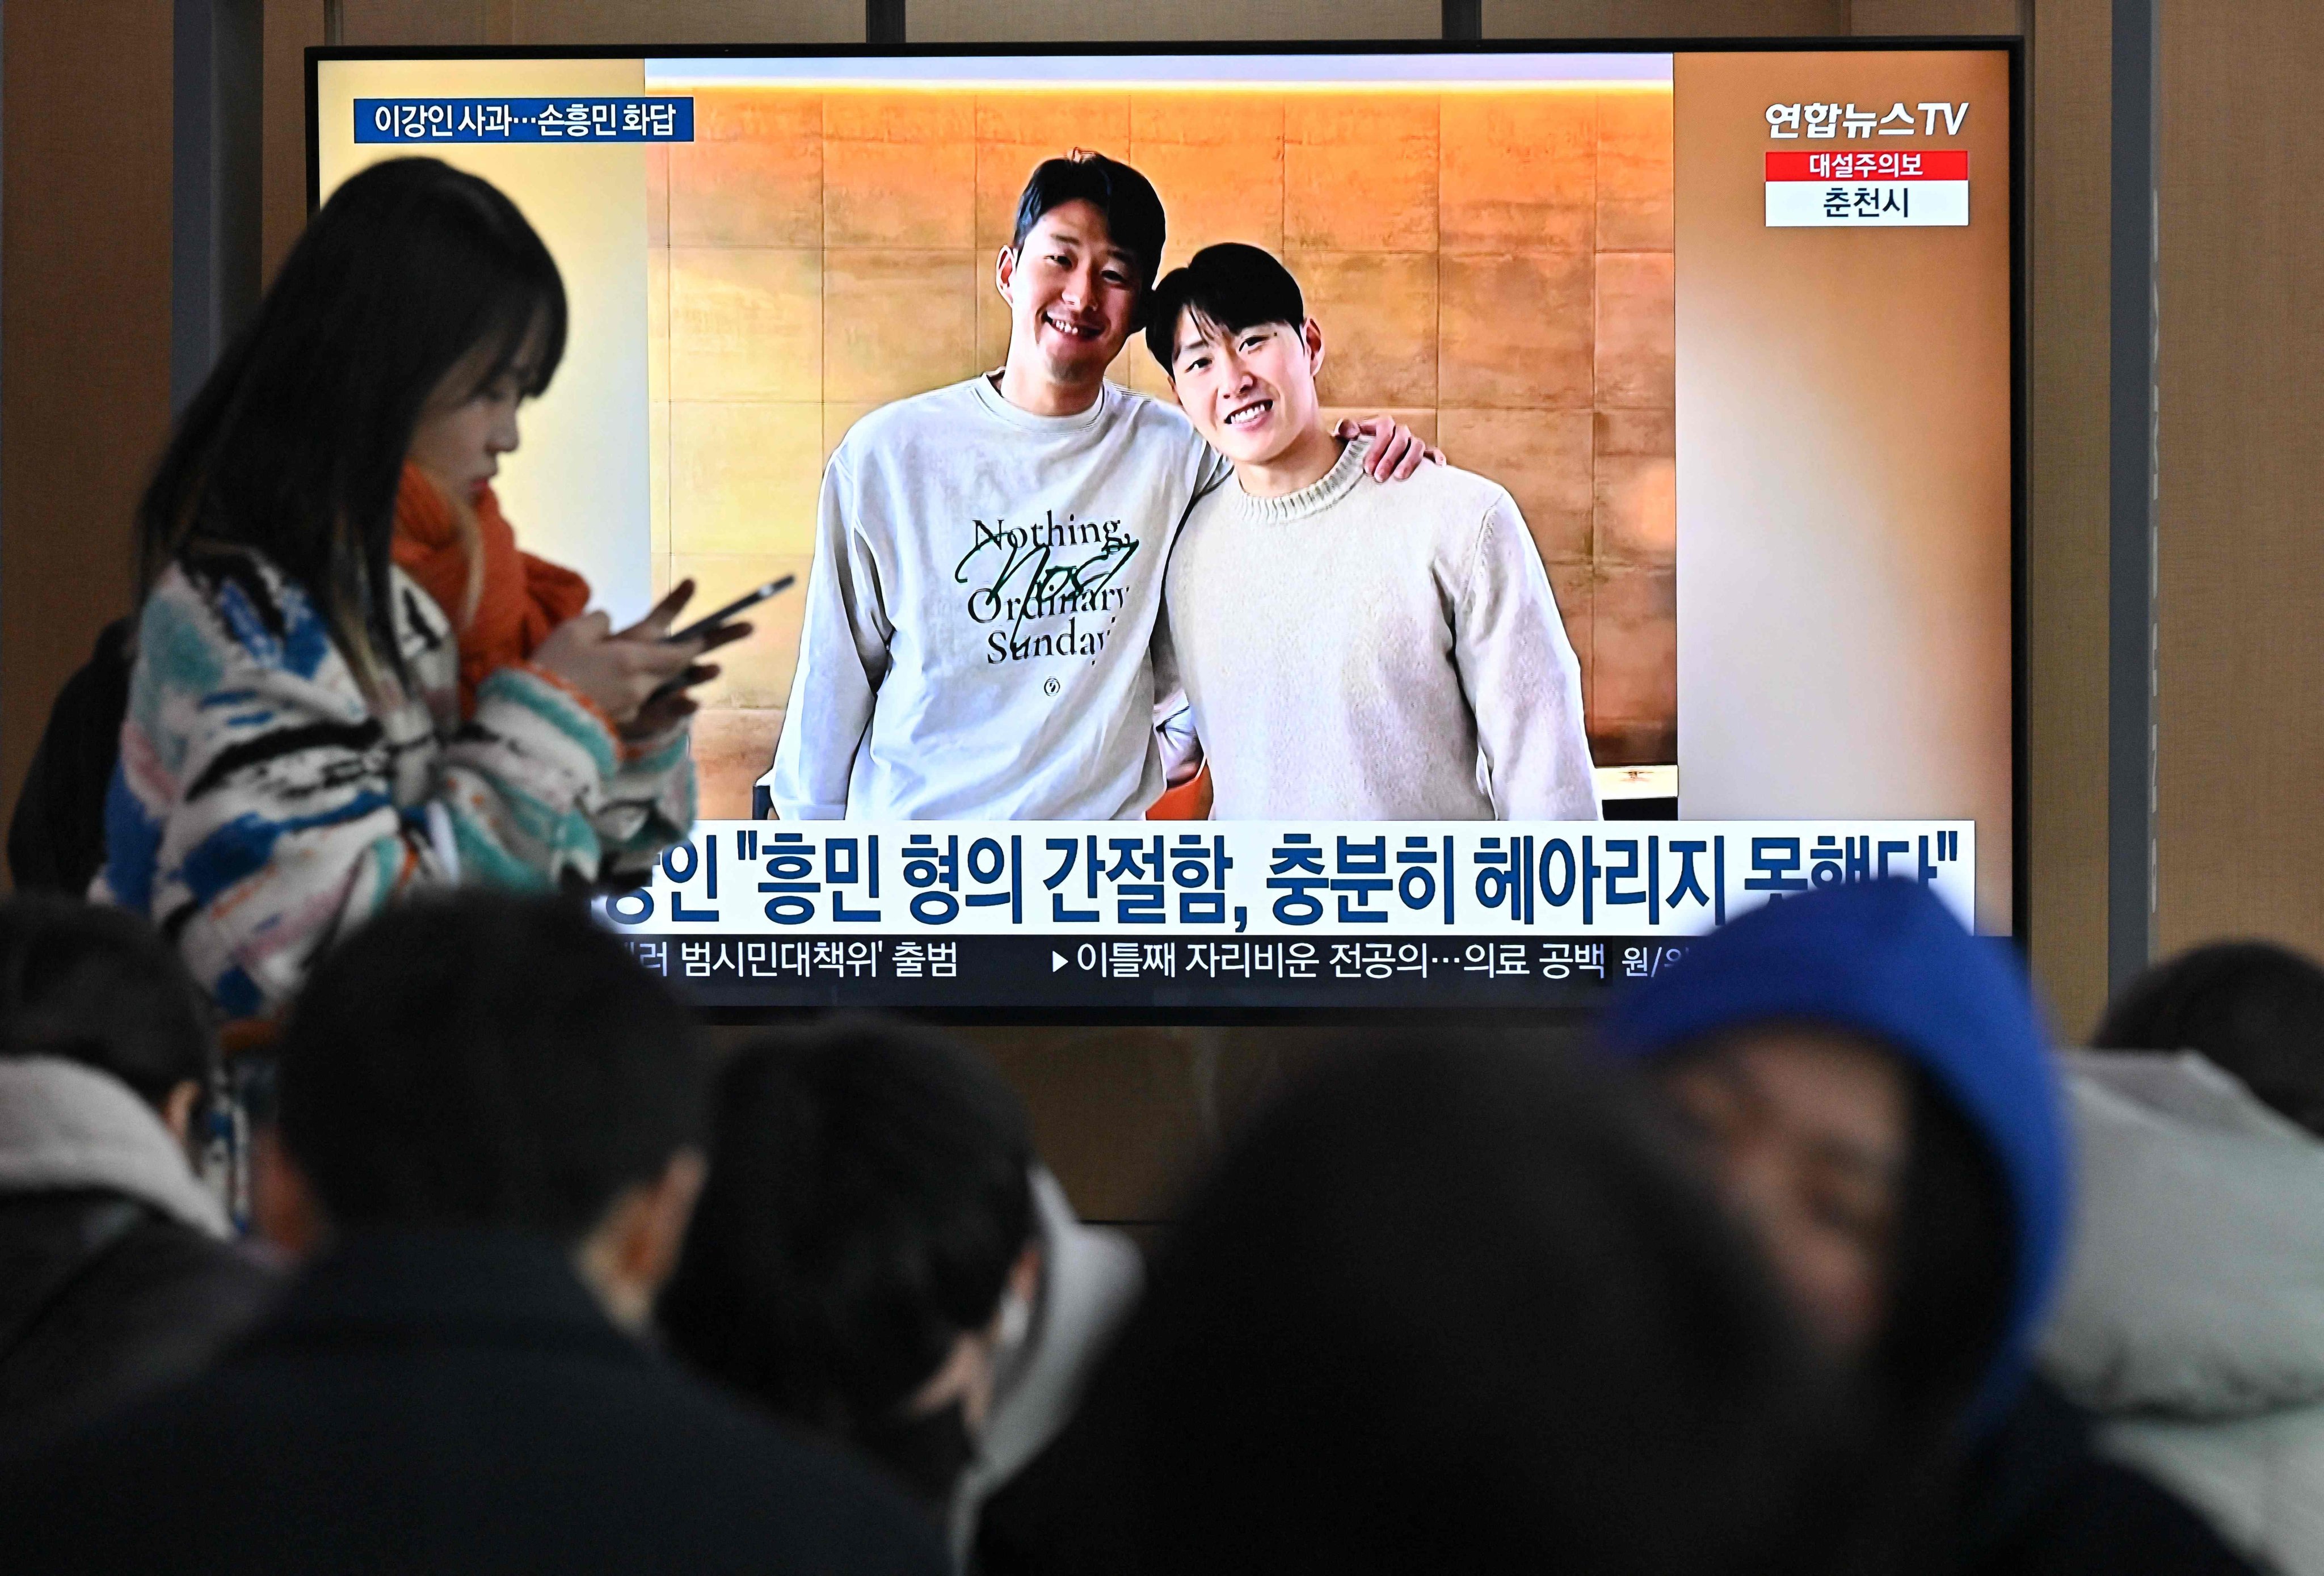 A woman walks past a television screen showing a news broadcast with a picture of Son Heung-min (L) and Lee Kang-in (R), at a railway station in Seoul on February 21, 2024. Son Heung-min apologised on February 21, for his role in a bust-up with South Korea team-mate Lee Kang-in at the Asian Cup and urged fans to forgive the Paris Saint-Germain player. (Photo by Jung Yeon-je / AFP)